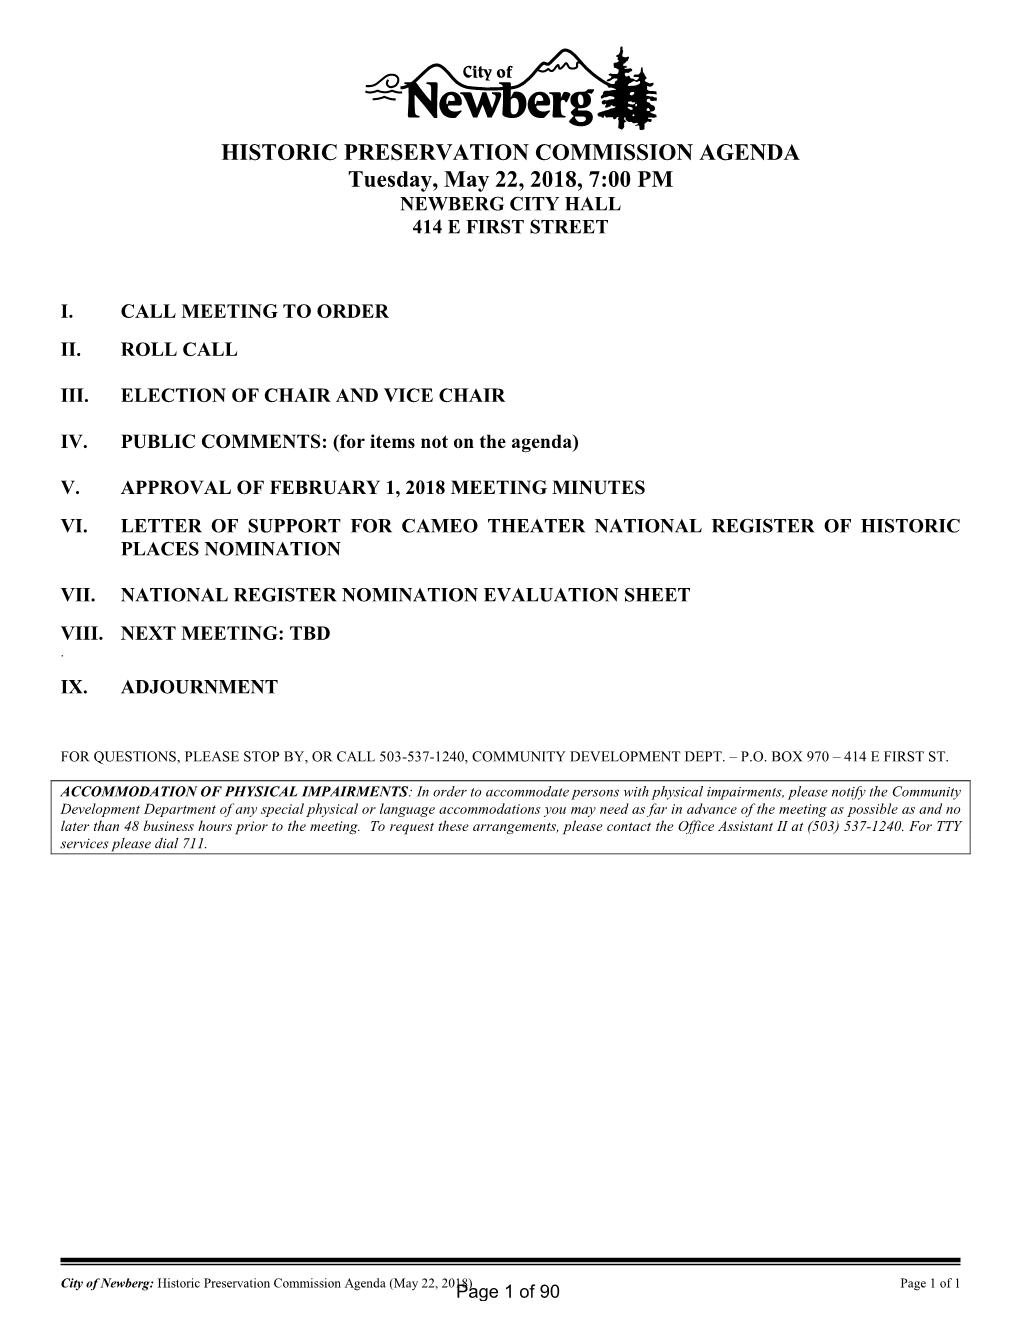 HISTORIC PRESERVATION COMMISSION AGENDA Tuesday, May 22, 2018, 7:00 PM NEWBERG CITY HALL 414 E FIRST STREET